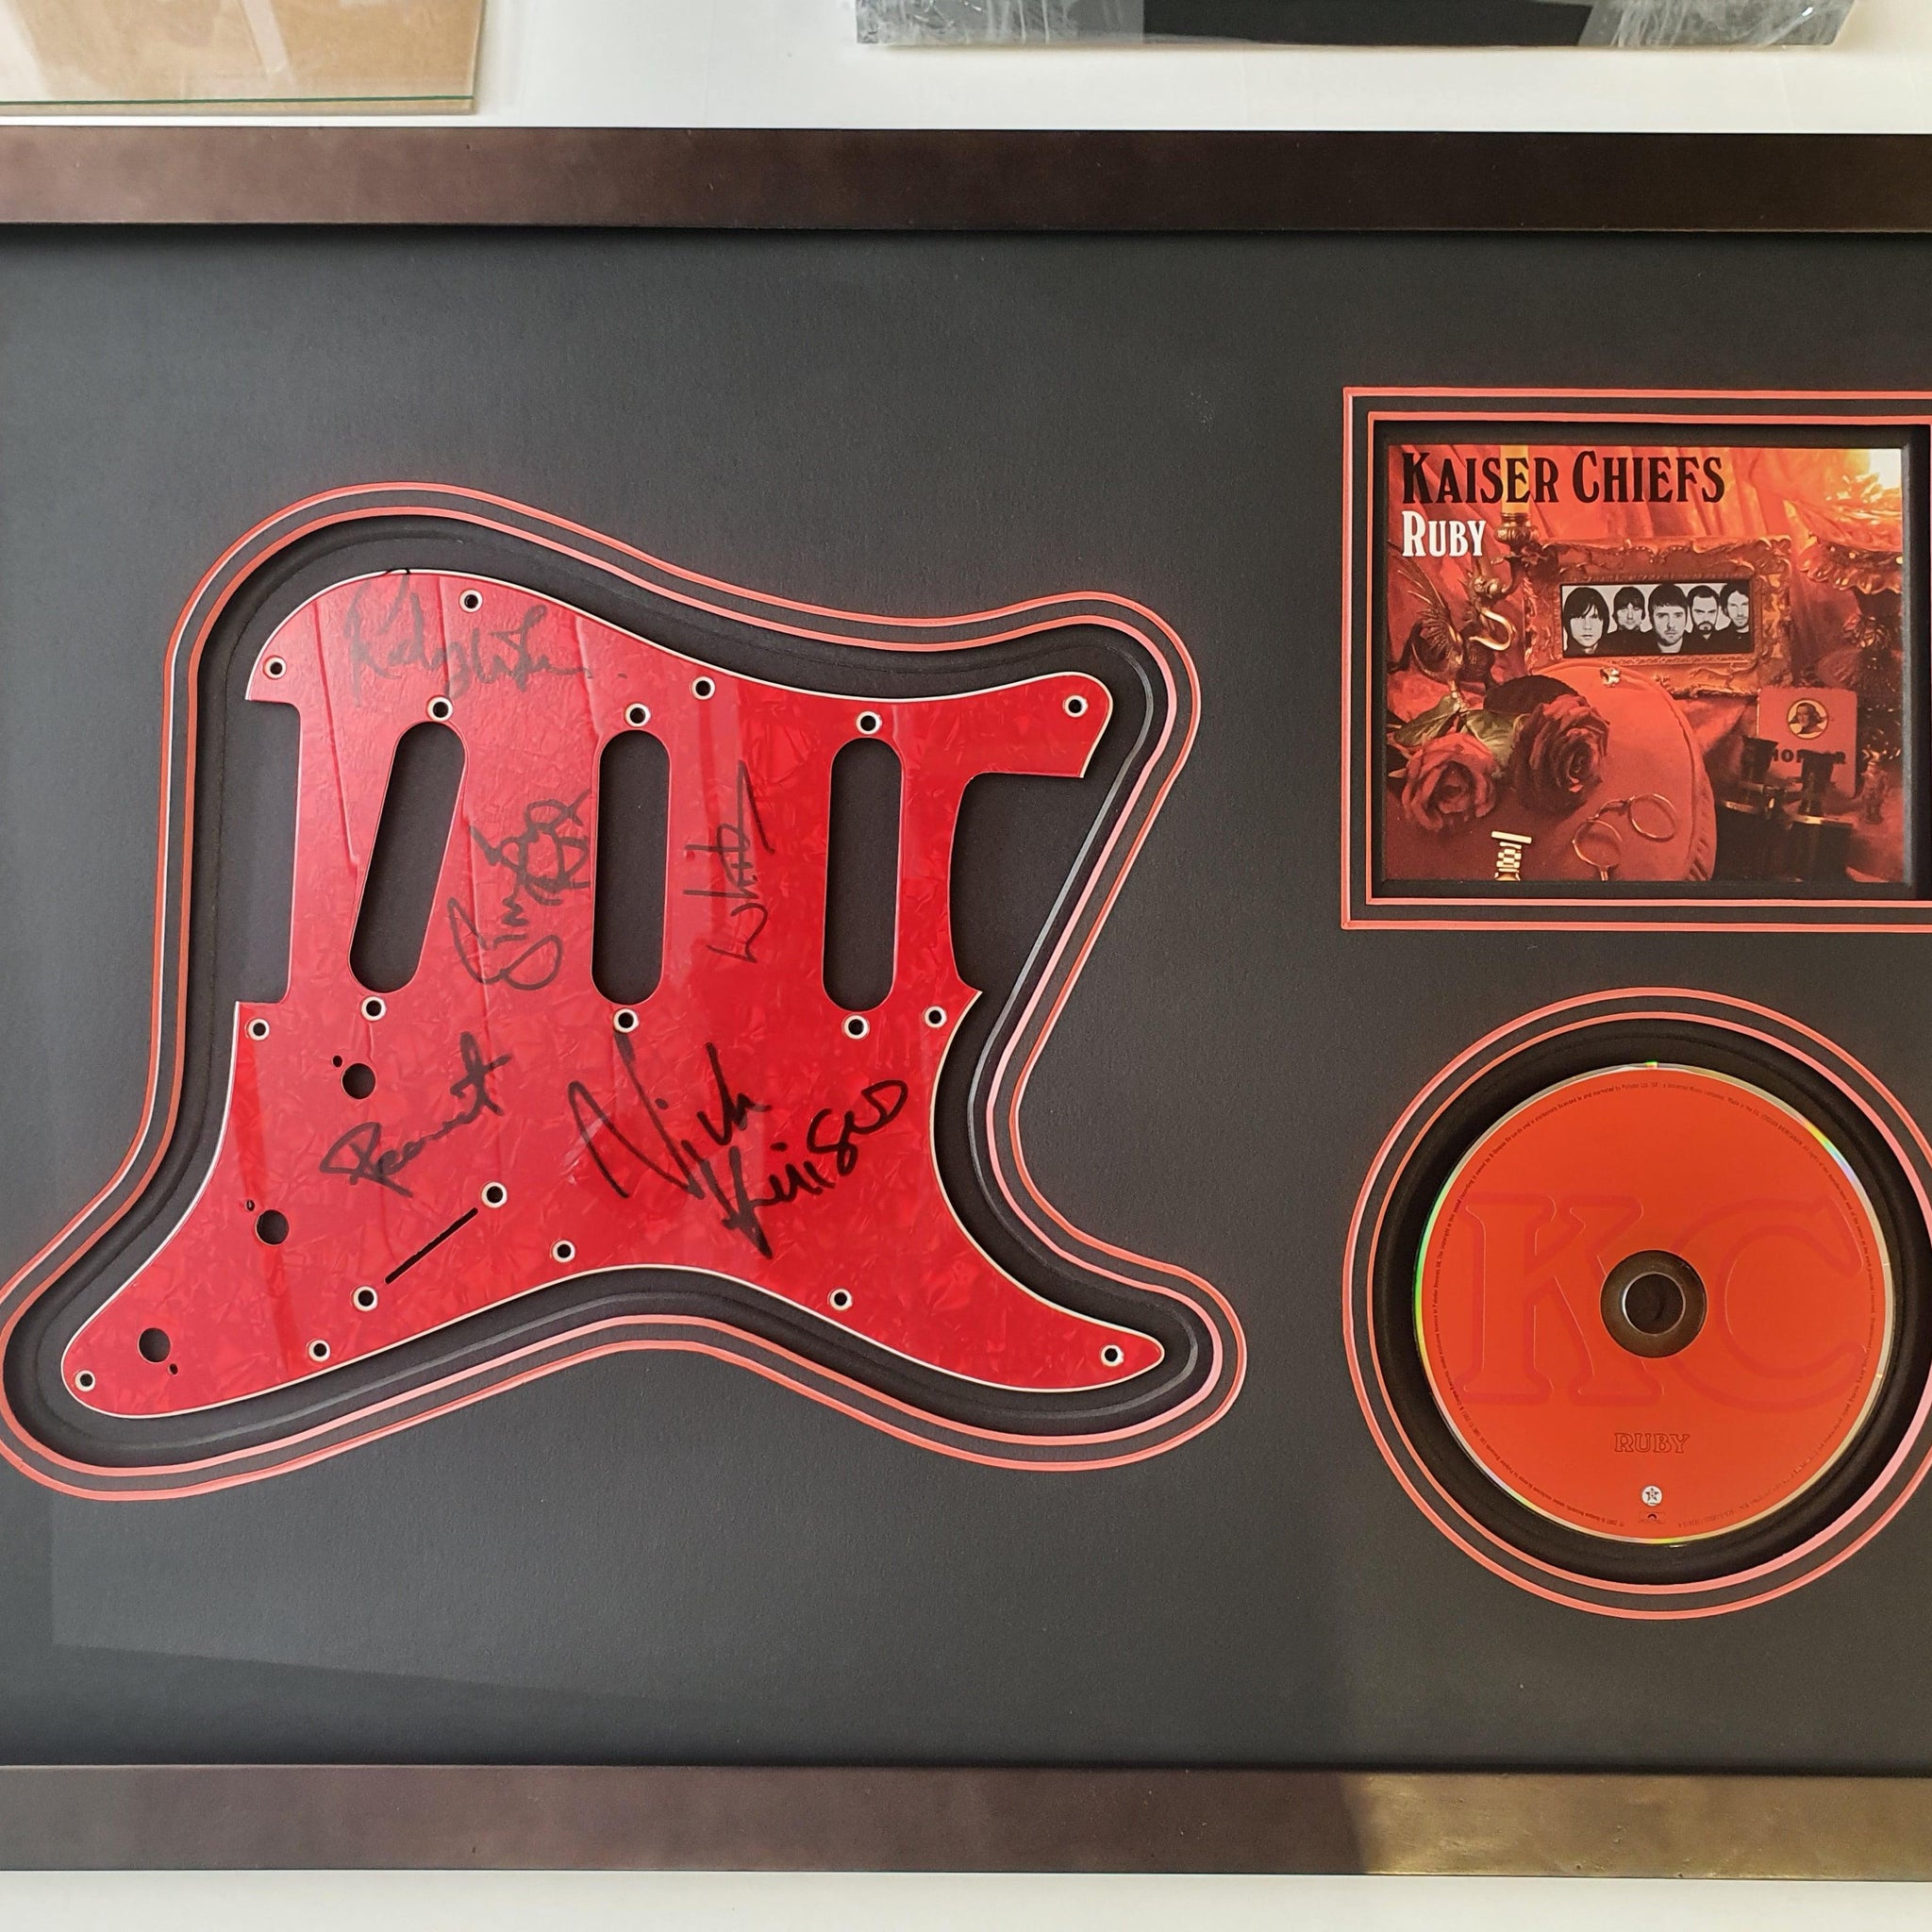 Kaiser Chiefs Signed Guitar Scratch Plate Framed. - Darling Picture Framing